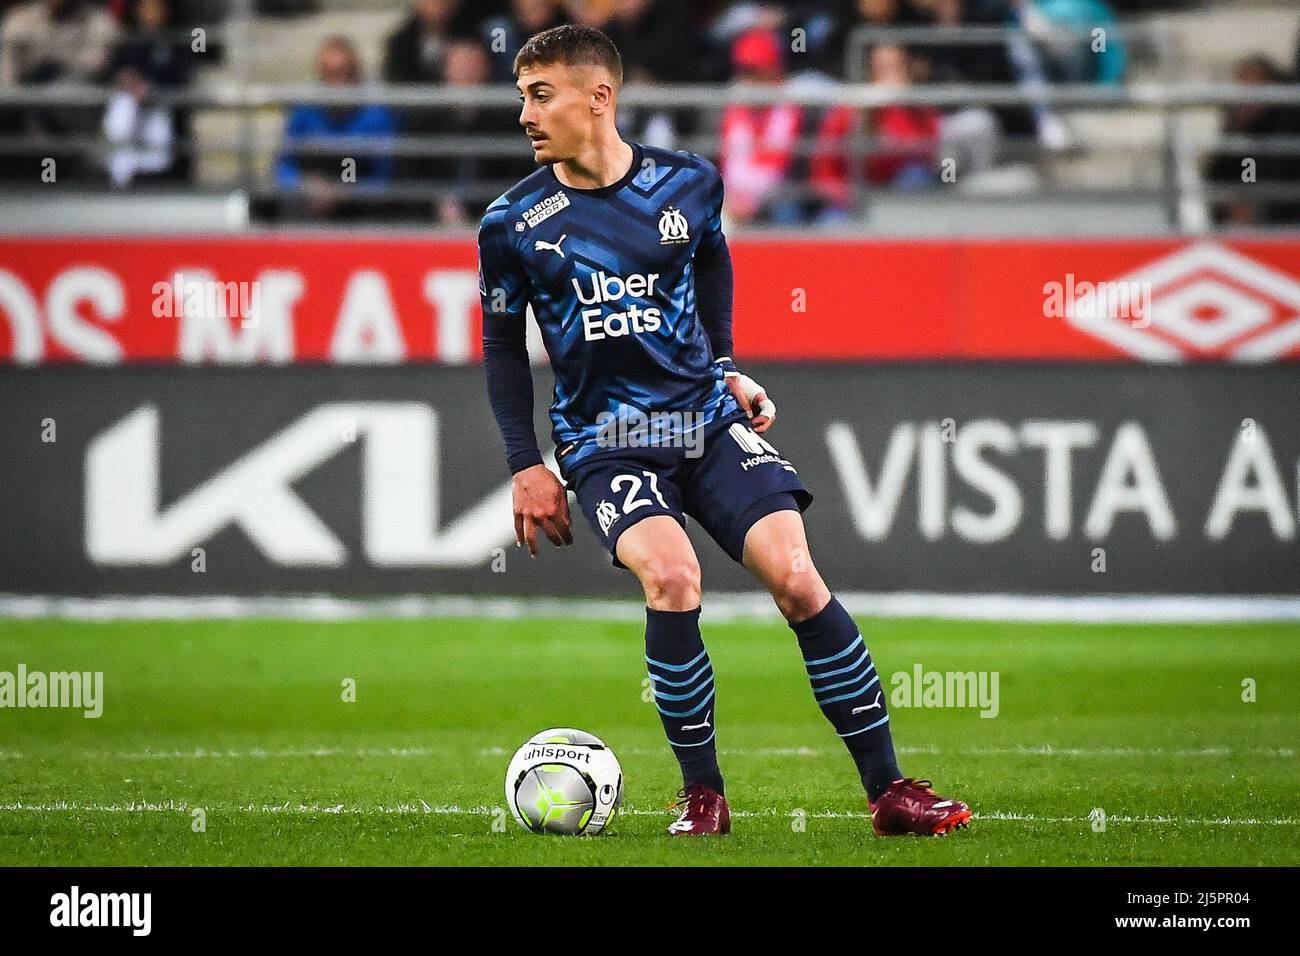 April 24, 2022, Reims, France: Valentin RONGIER of Marseille during the  French championship Ligue 1 football match between Stade de Reims and  Olympique de Marseille on April 24, 2022 at Auguste Delaune